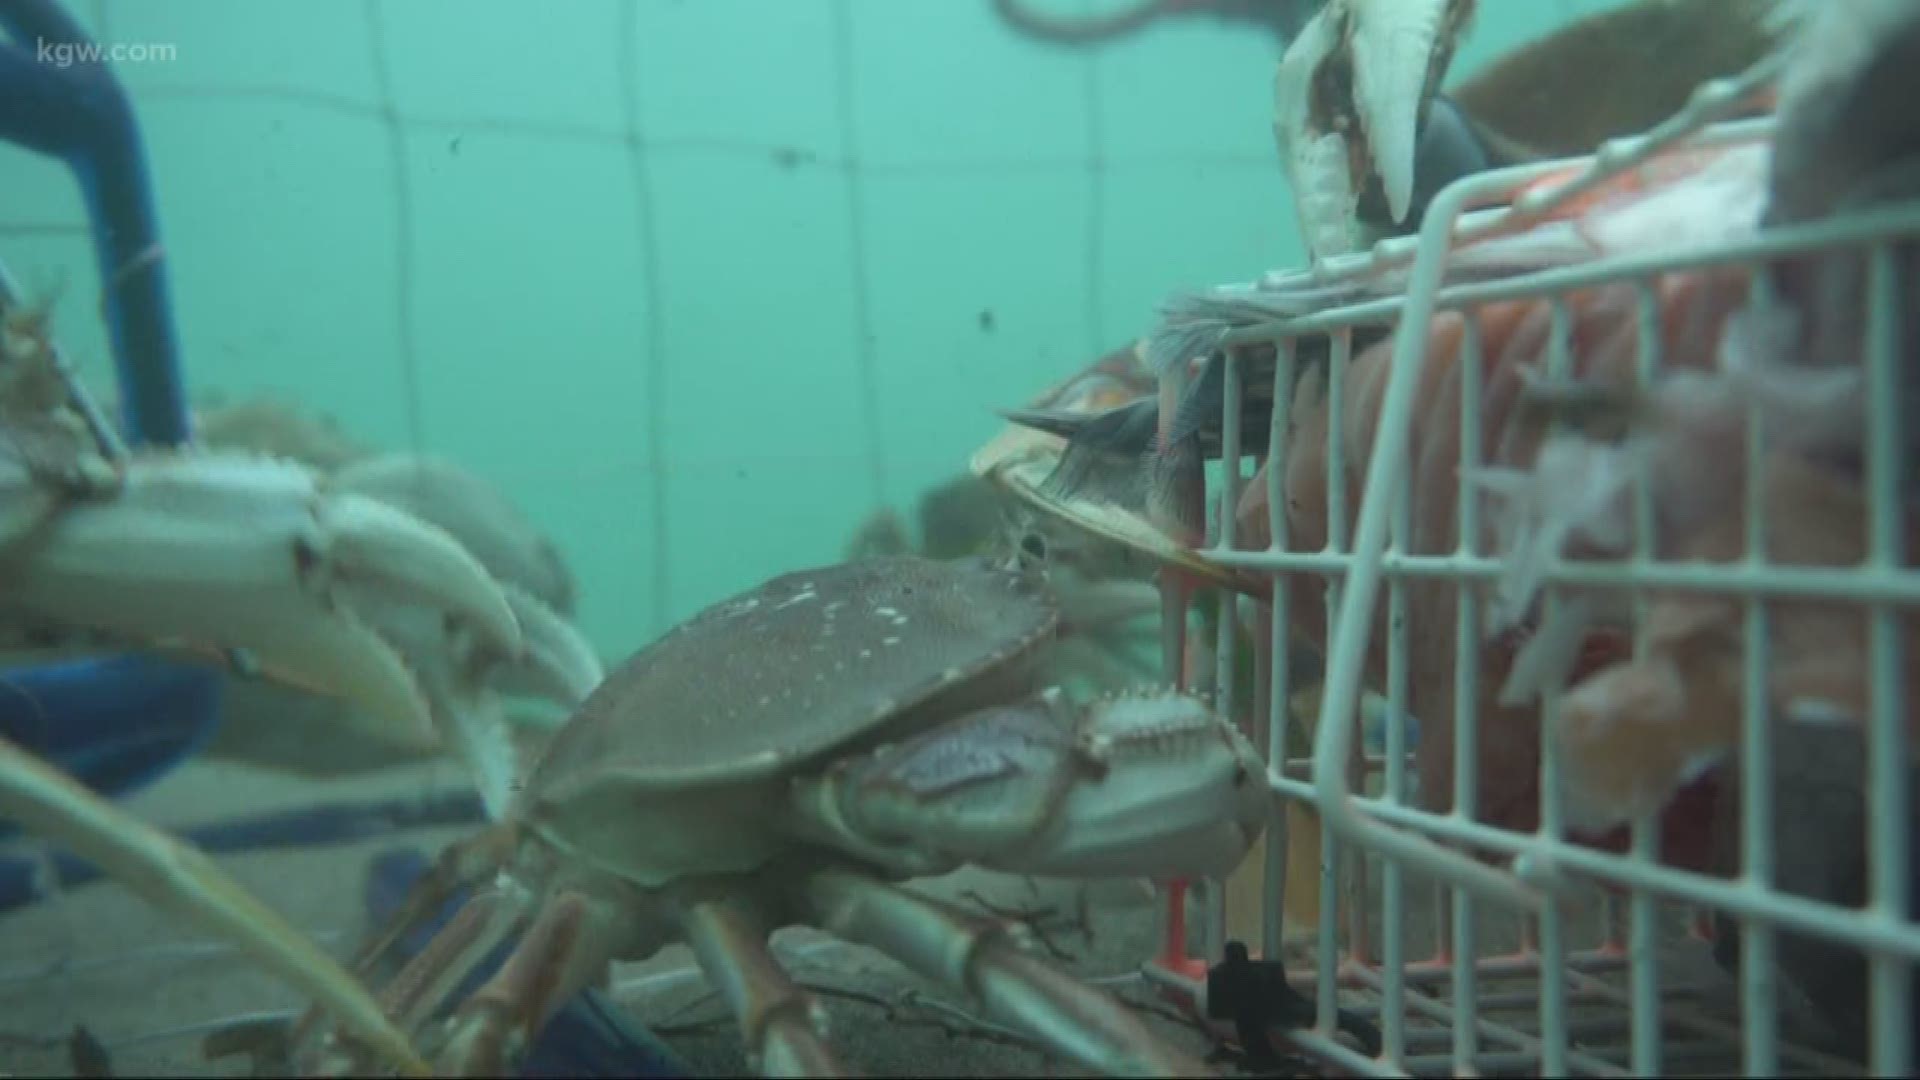 Grant McOmie goes crabbing at the mouth of the Columbia River with guide Bill Monroe Jr.